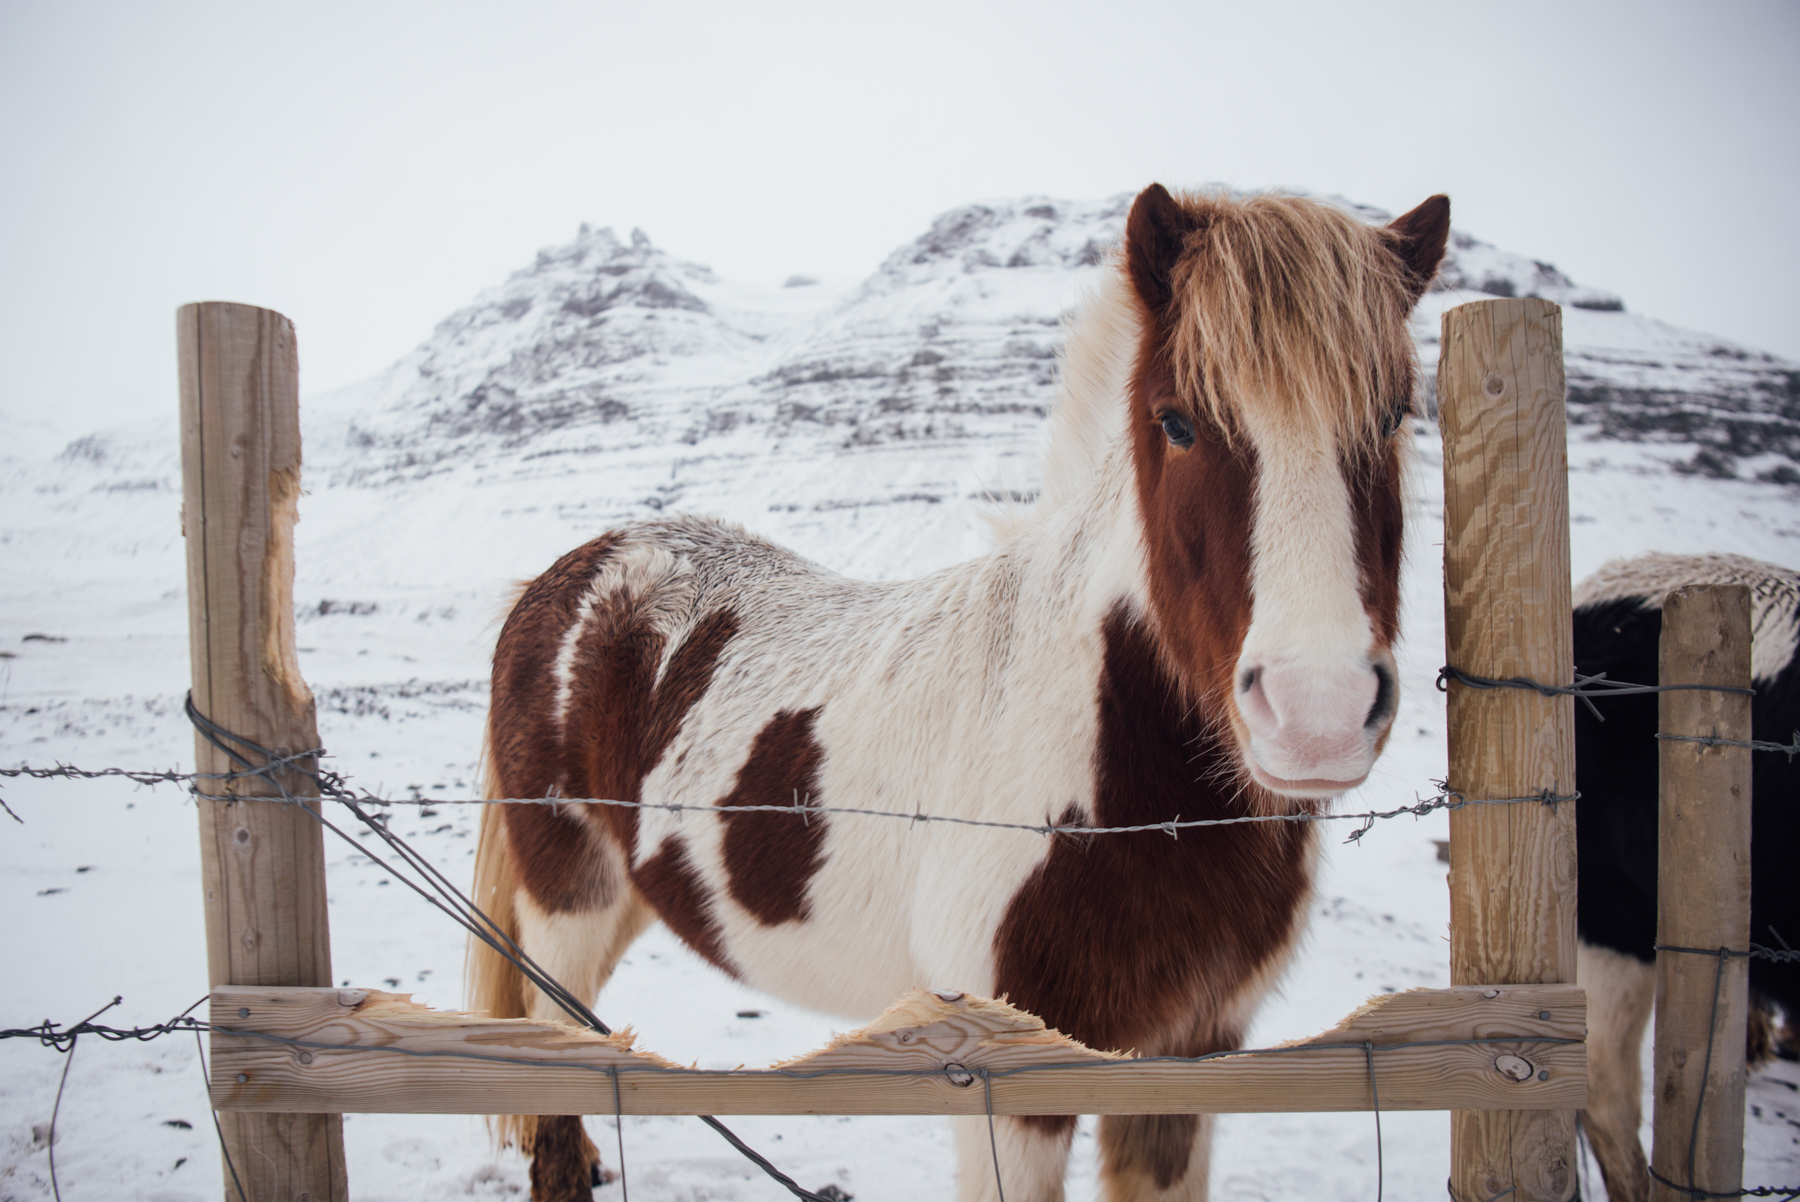 Iceland – Kirkjufell mountain and waterfall and horses. Trip to Iceland with Katie and Holly 1/1-1/7.